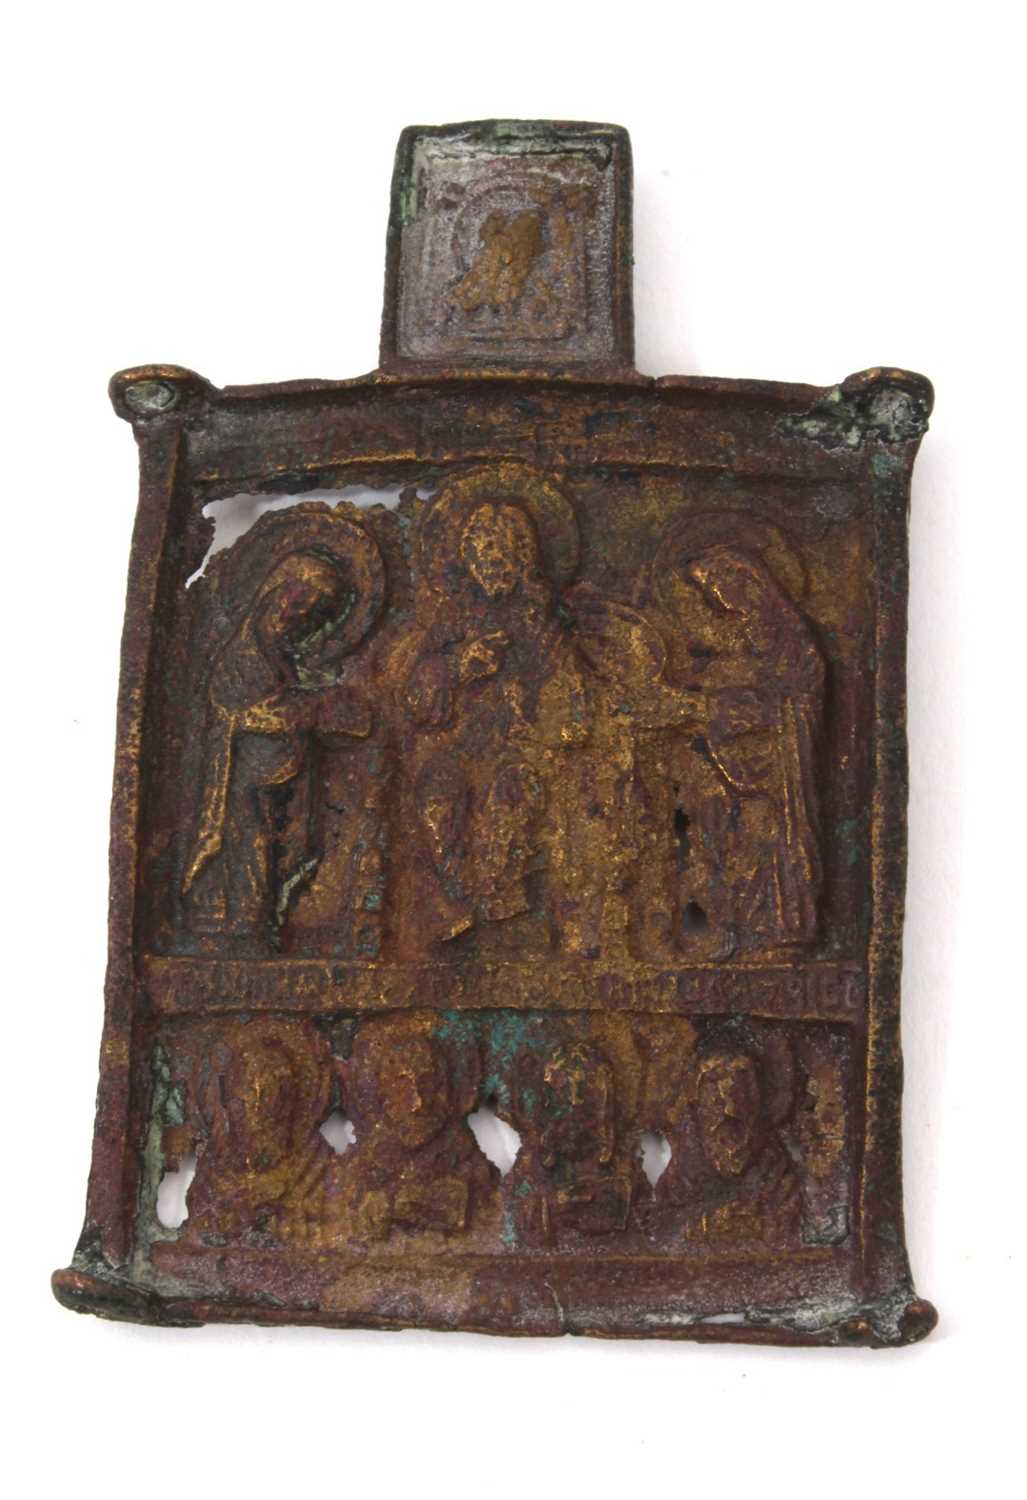 19th century Russian bronze traveling icon: Provenance: a gift to the vendor from another icon, the